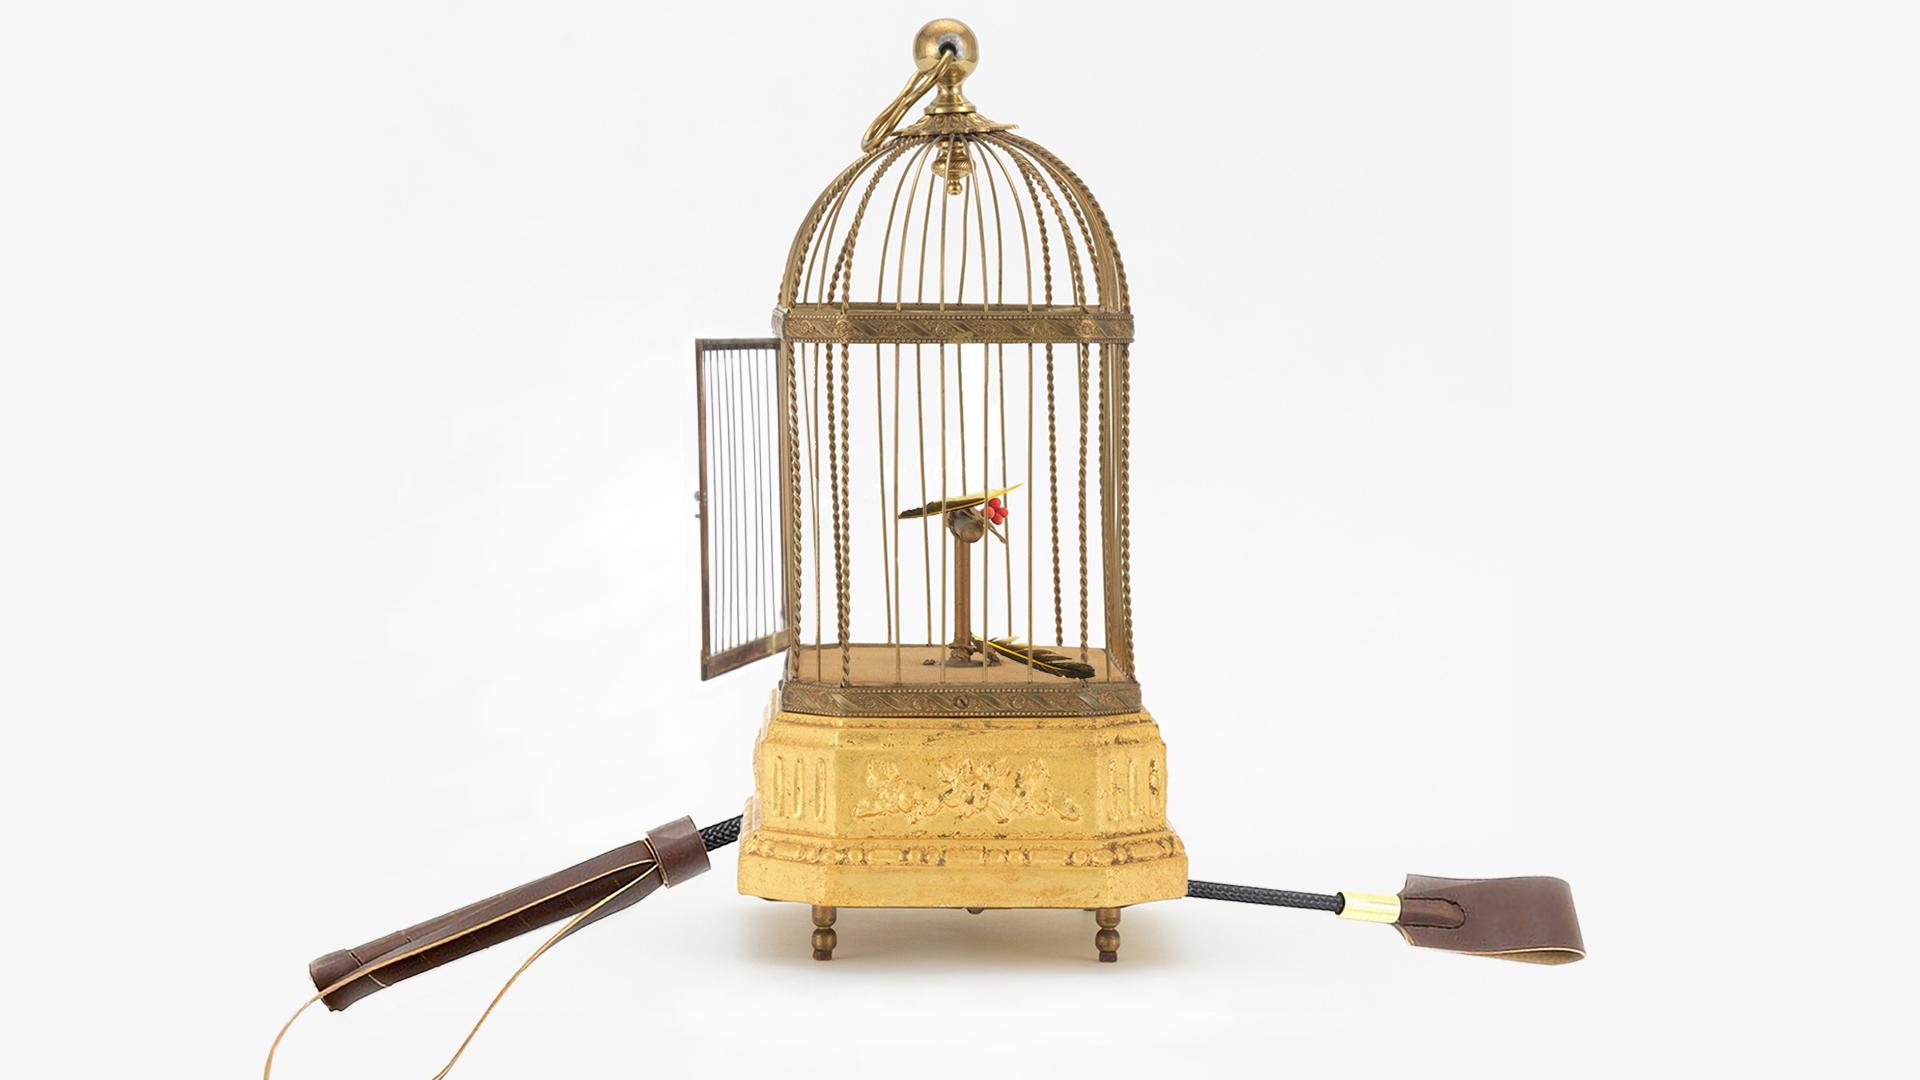 An open bird cage containing two feathers, and a broken riding crop laying next to it